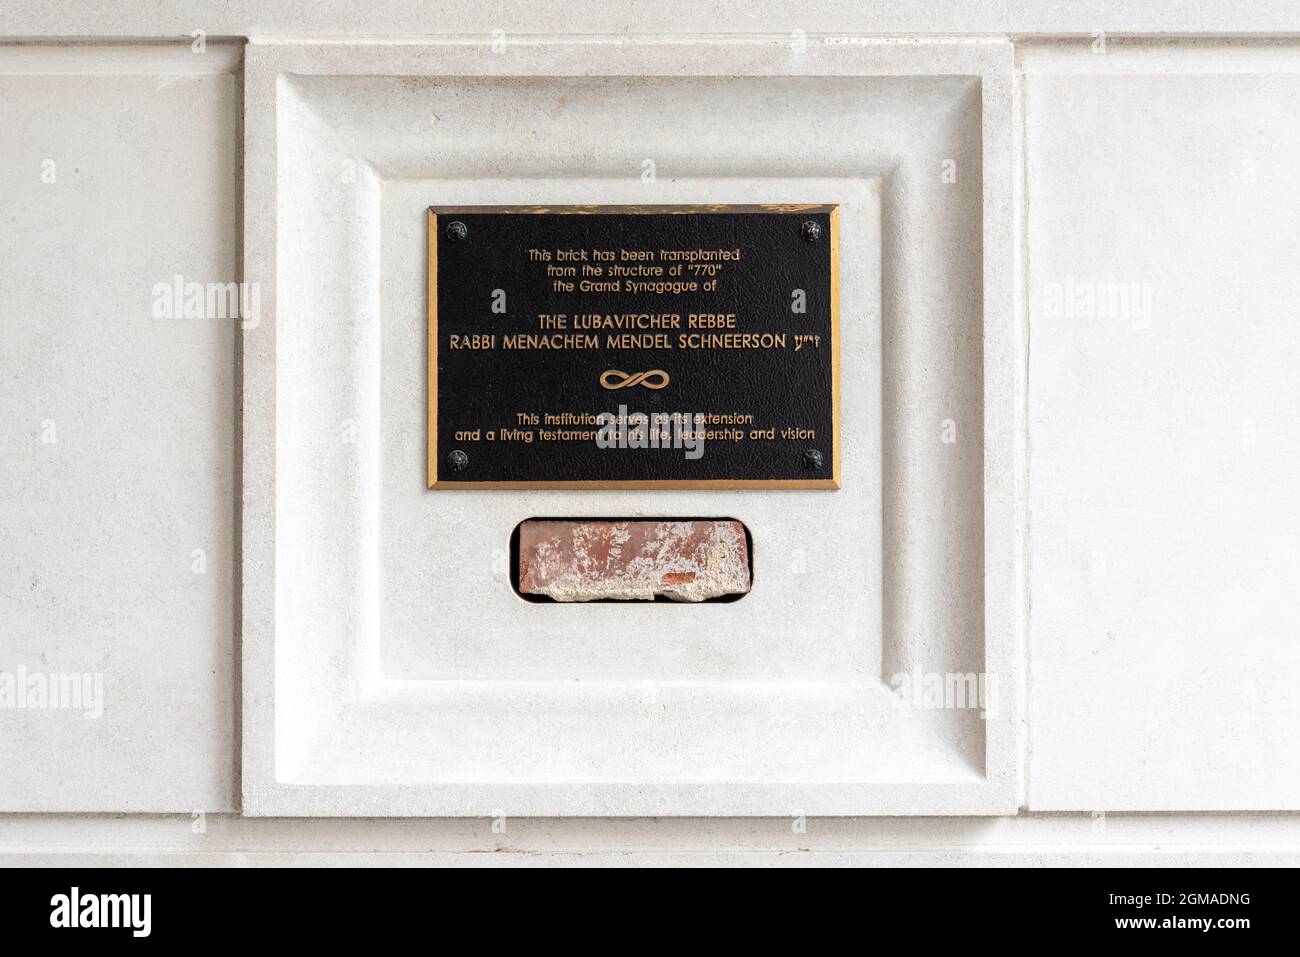 A brick from the Grand Synagogue of the Lubavitcher Rebbe at the Chabad on Bayview Centre for Jewish Life which is located in 2437 Bayview Avenue in T Stock Photo